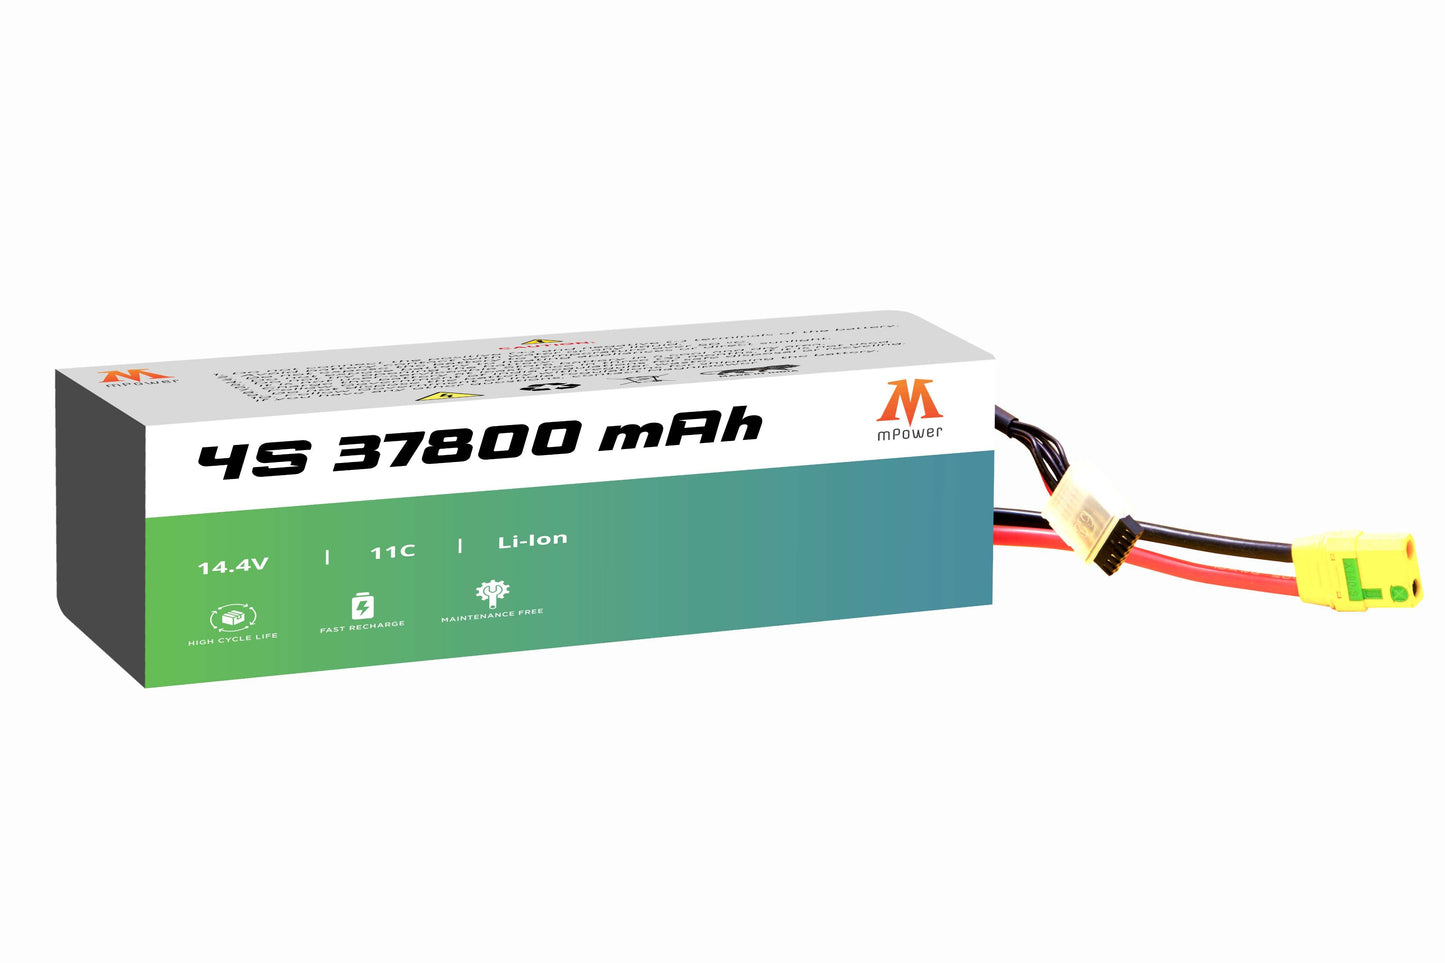 mPower 4S 37800mAh Lithium-Ion Battery for Survey Drones